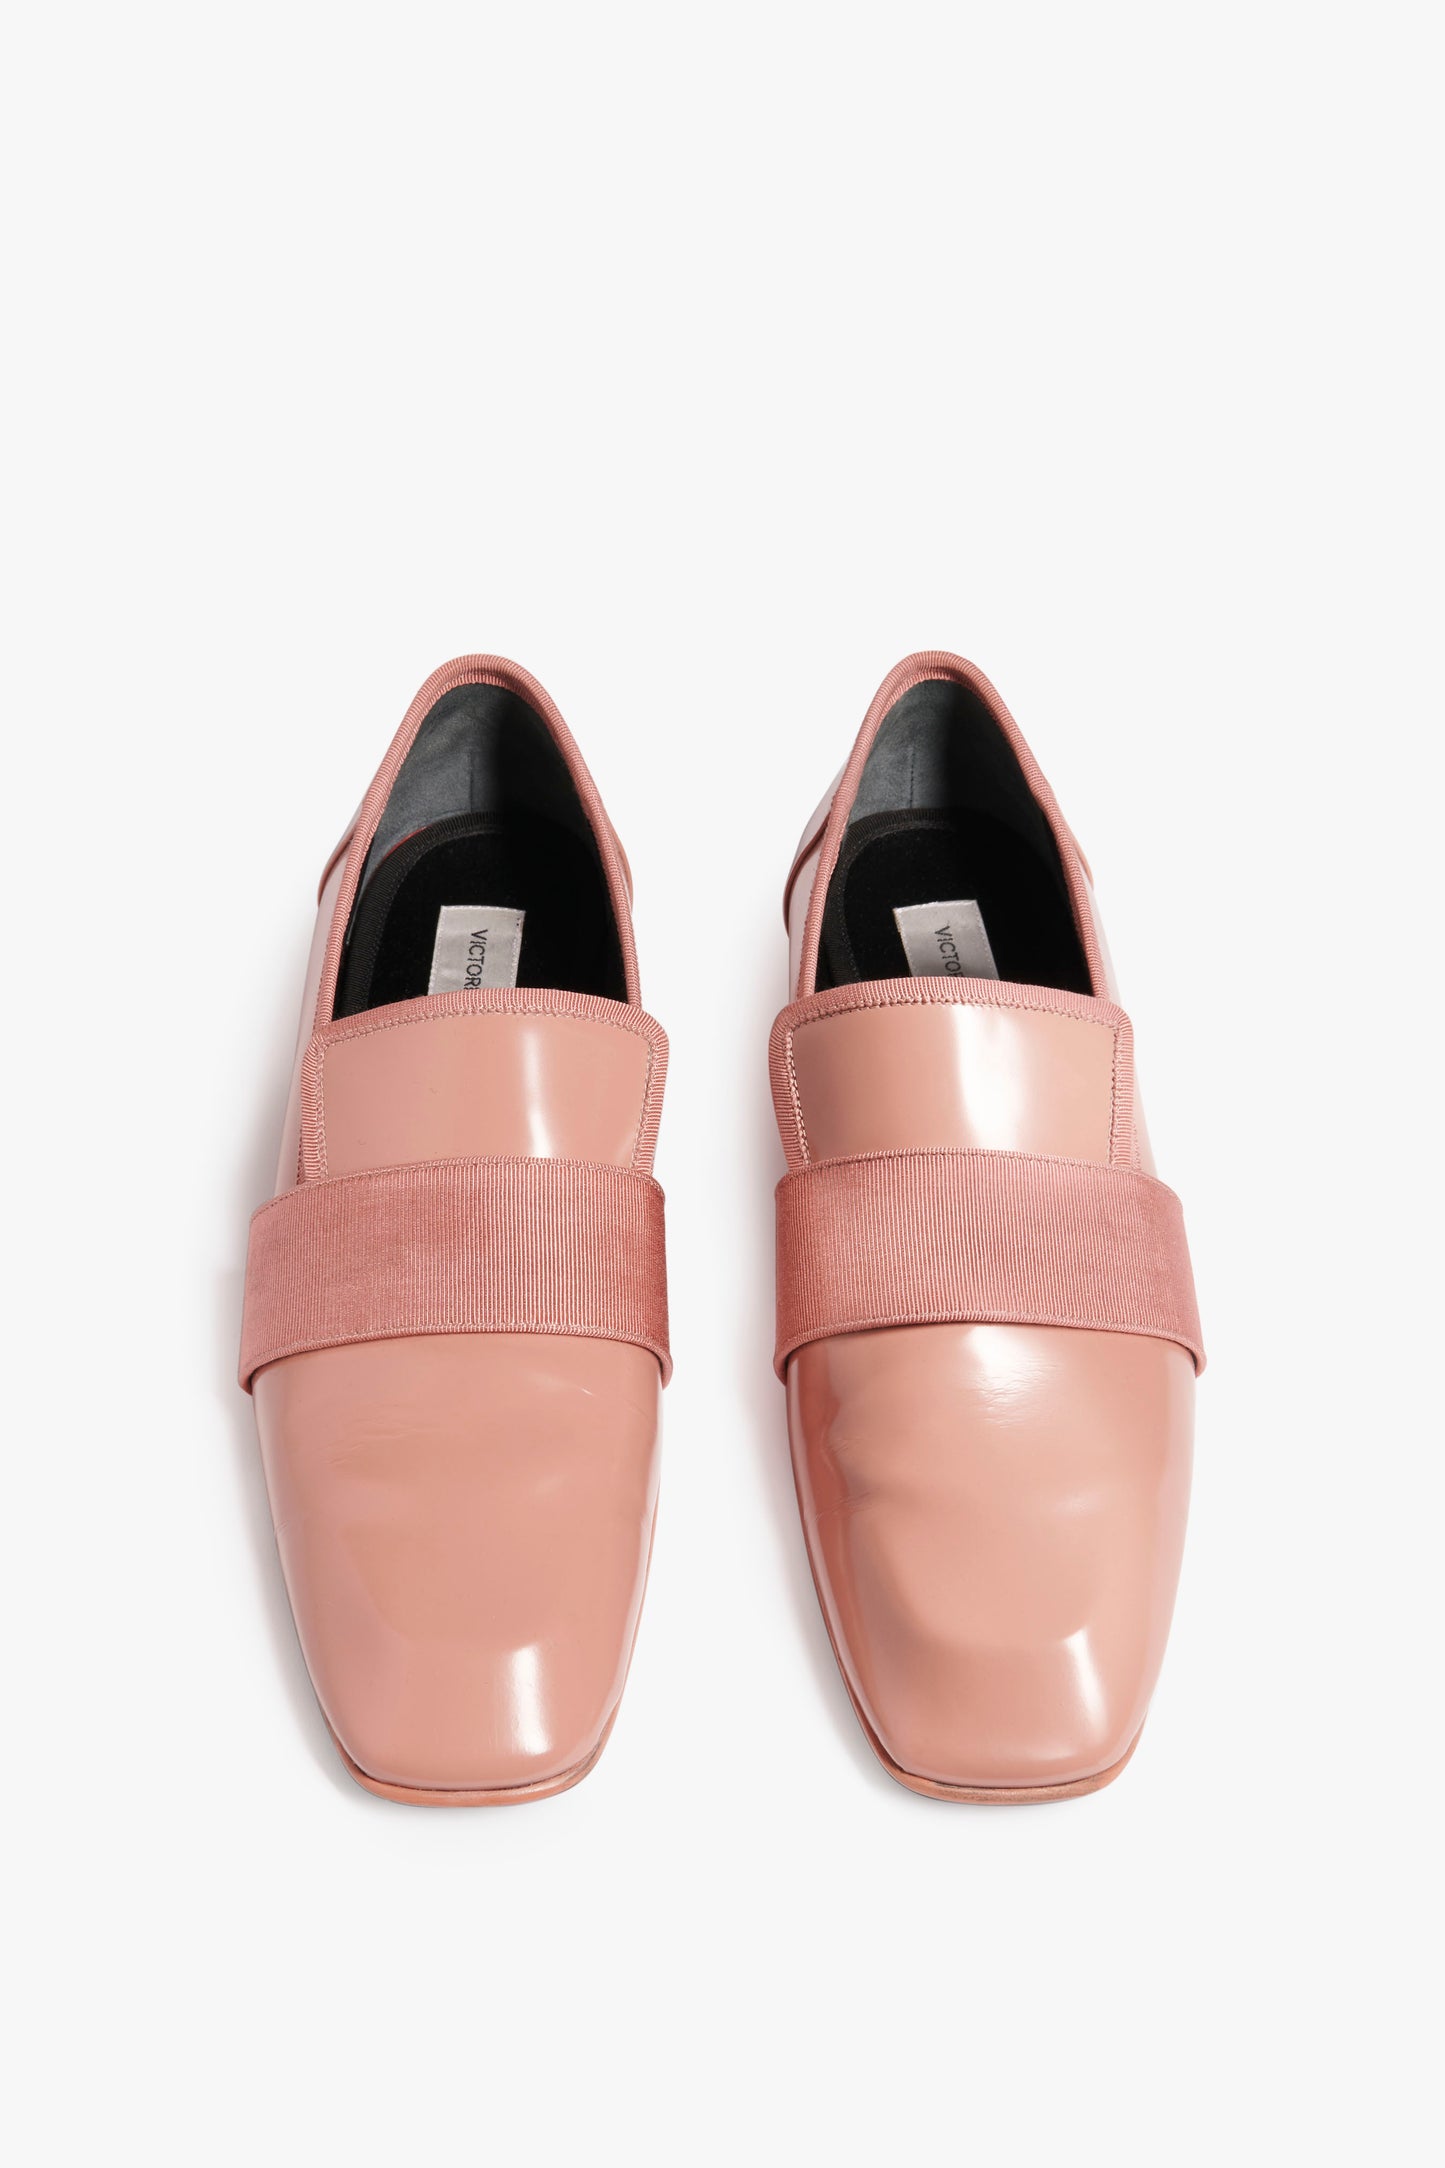 A pair of shiny, light pink Debbie Loafer in Rose by Victoria Beckham with a broad strap across the top and a chic square-toe design.